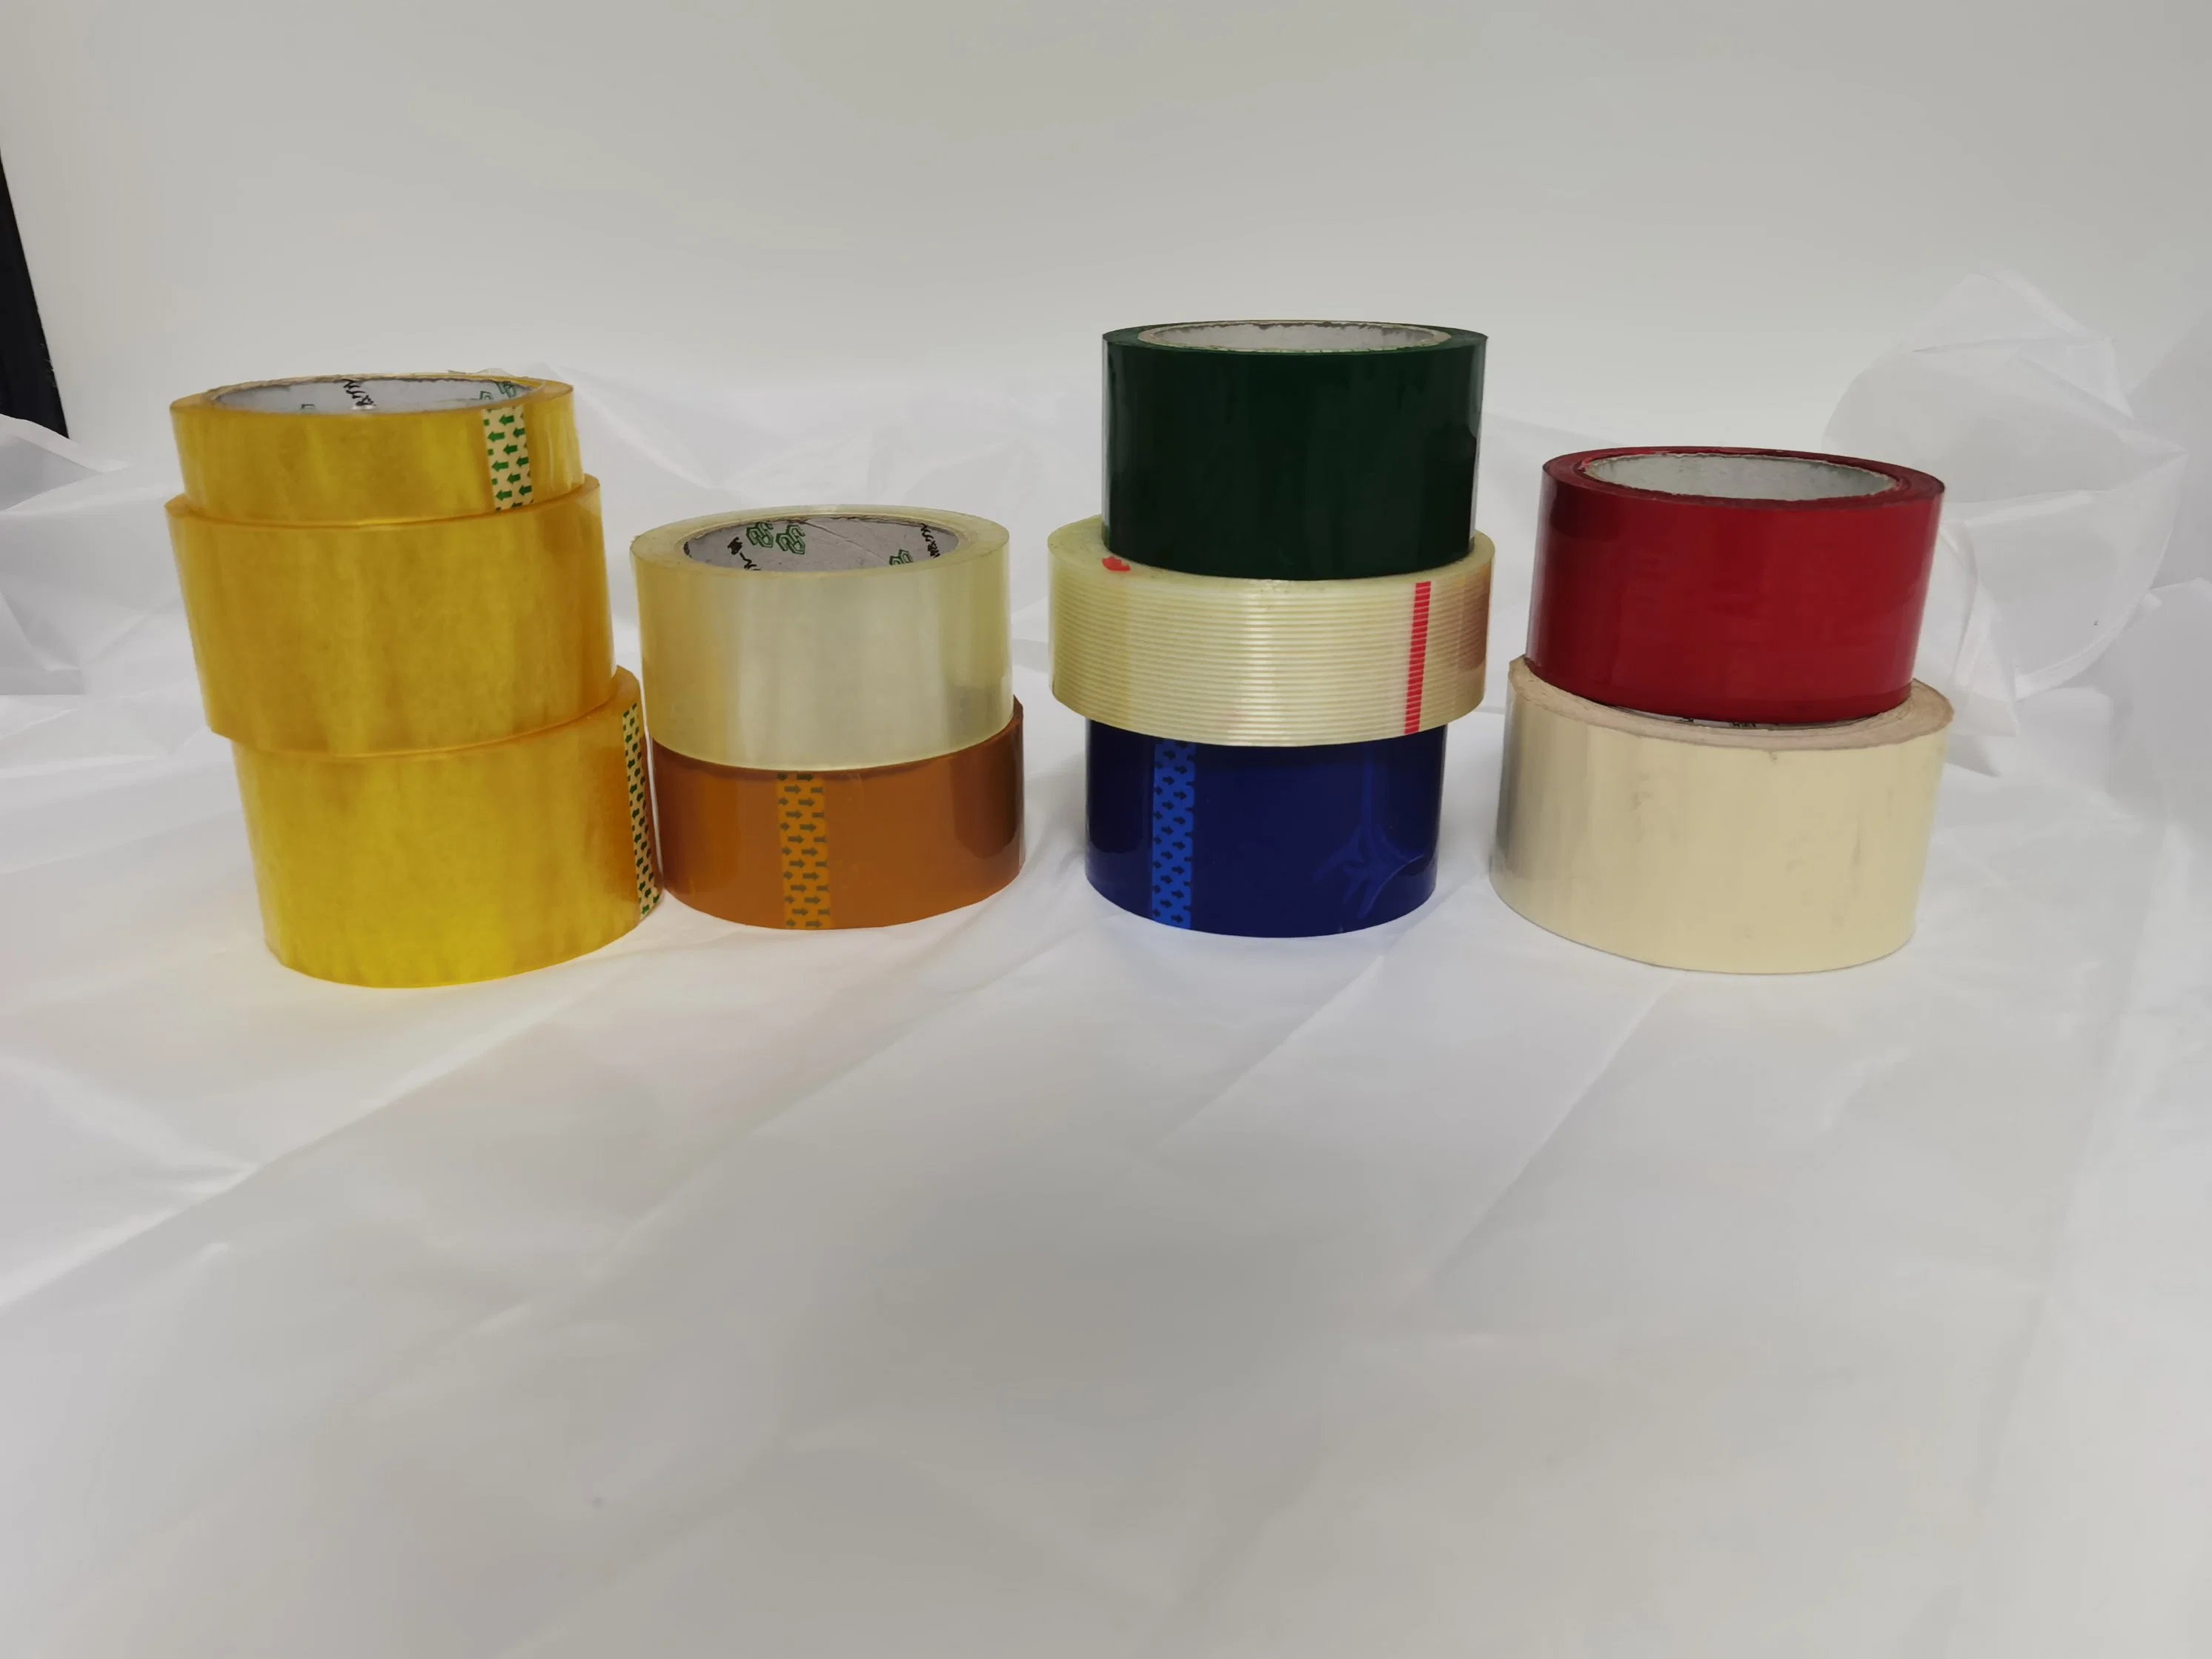 BOPP Masking Packaging Stationery Clear Adhesive Tapes Sealing Packing Self Adhesive Tape